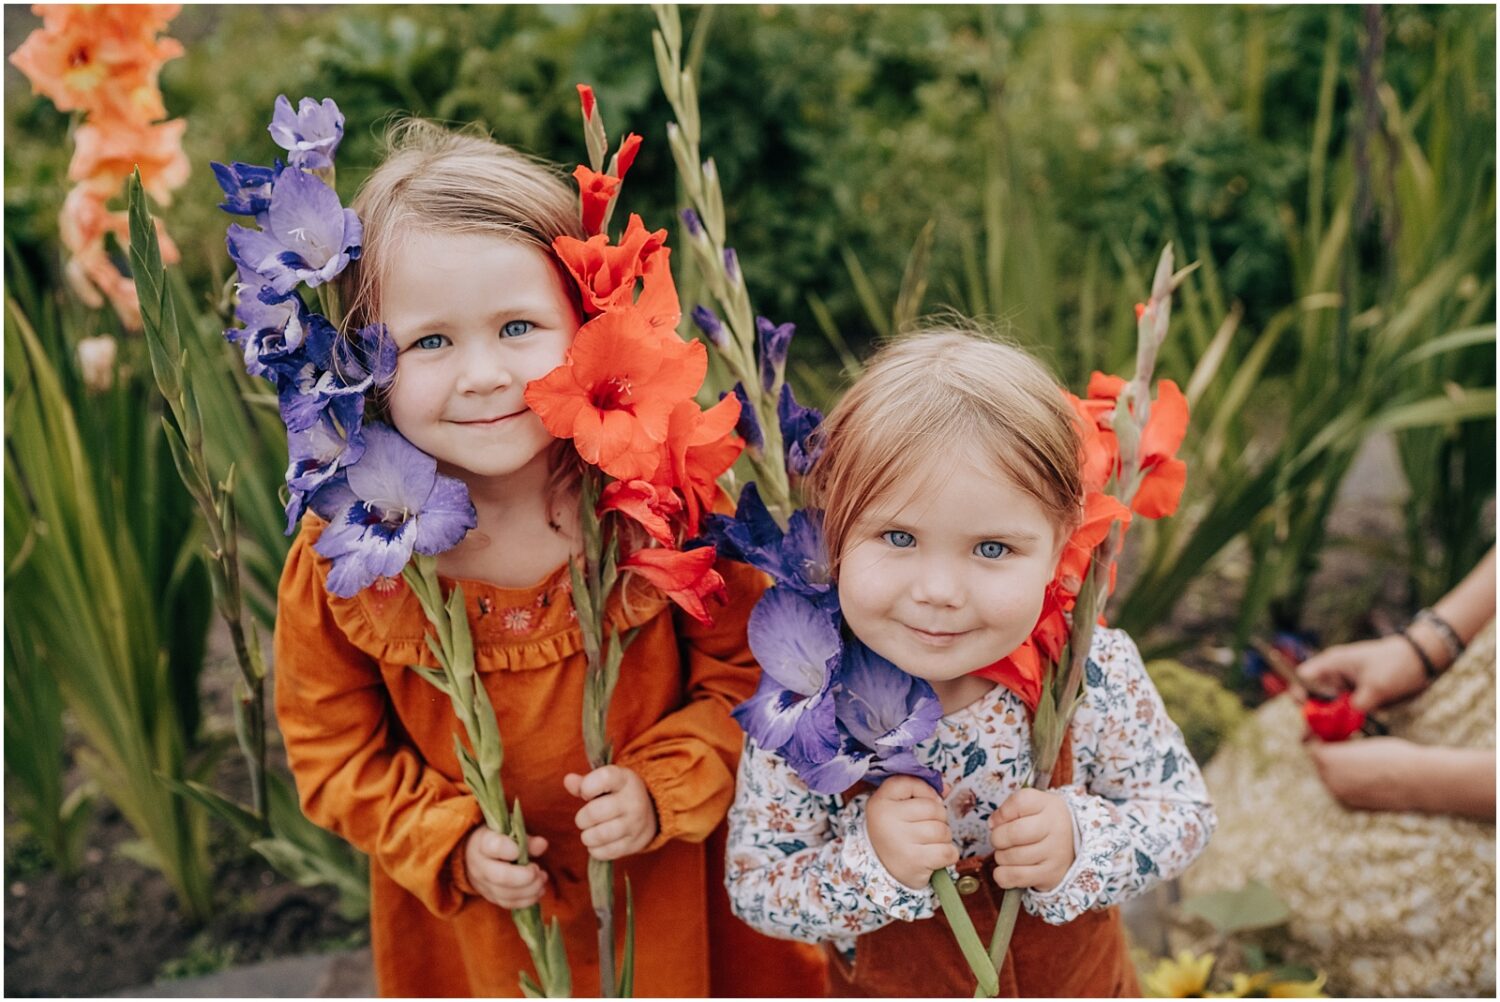 Family in Edmonton with two little gitls holding flowers for a photoshoot